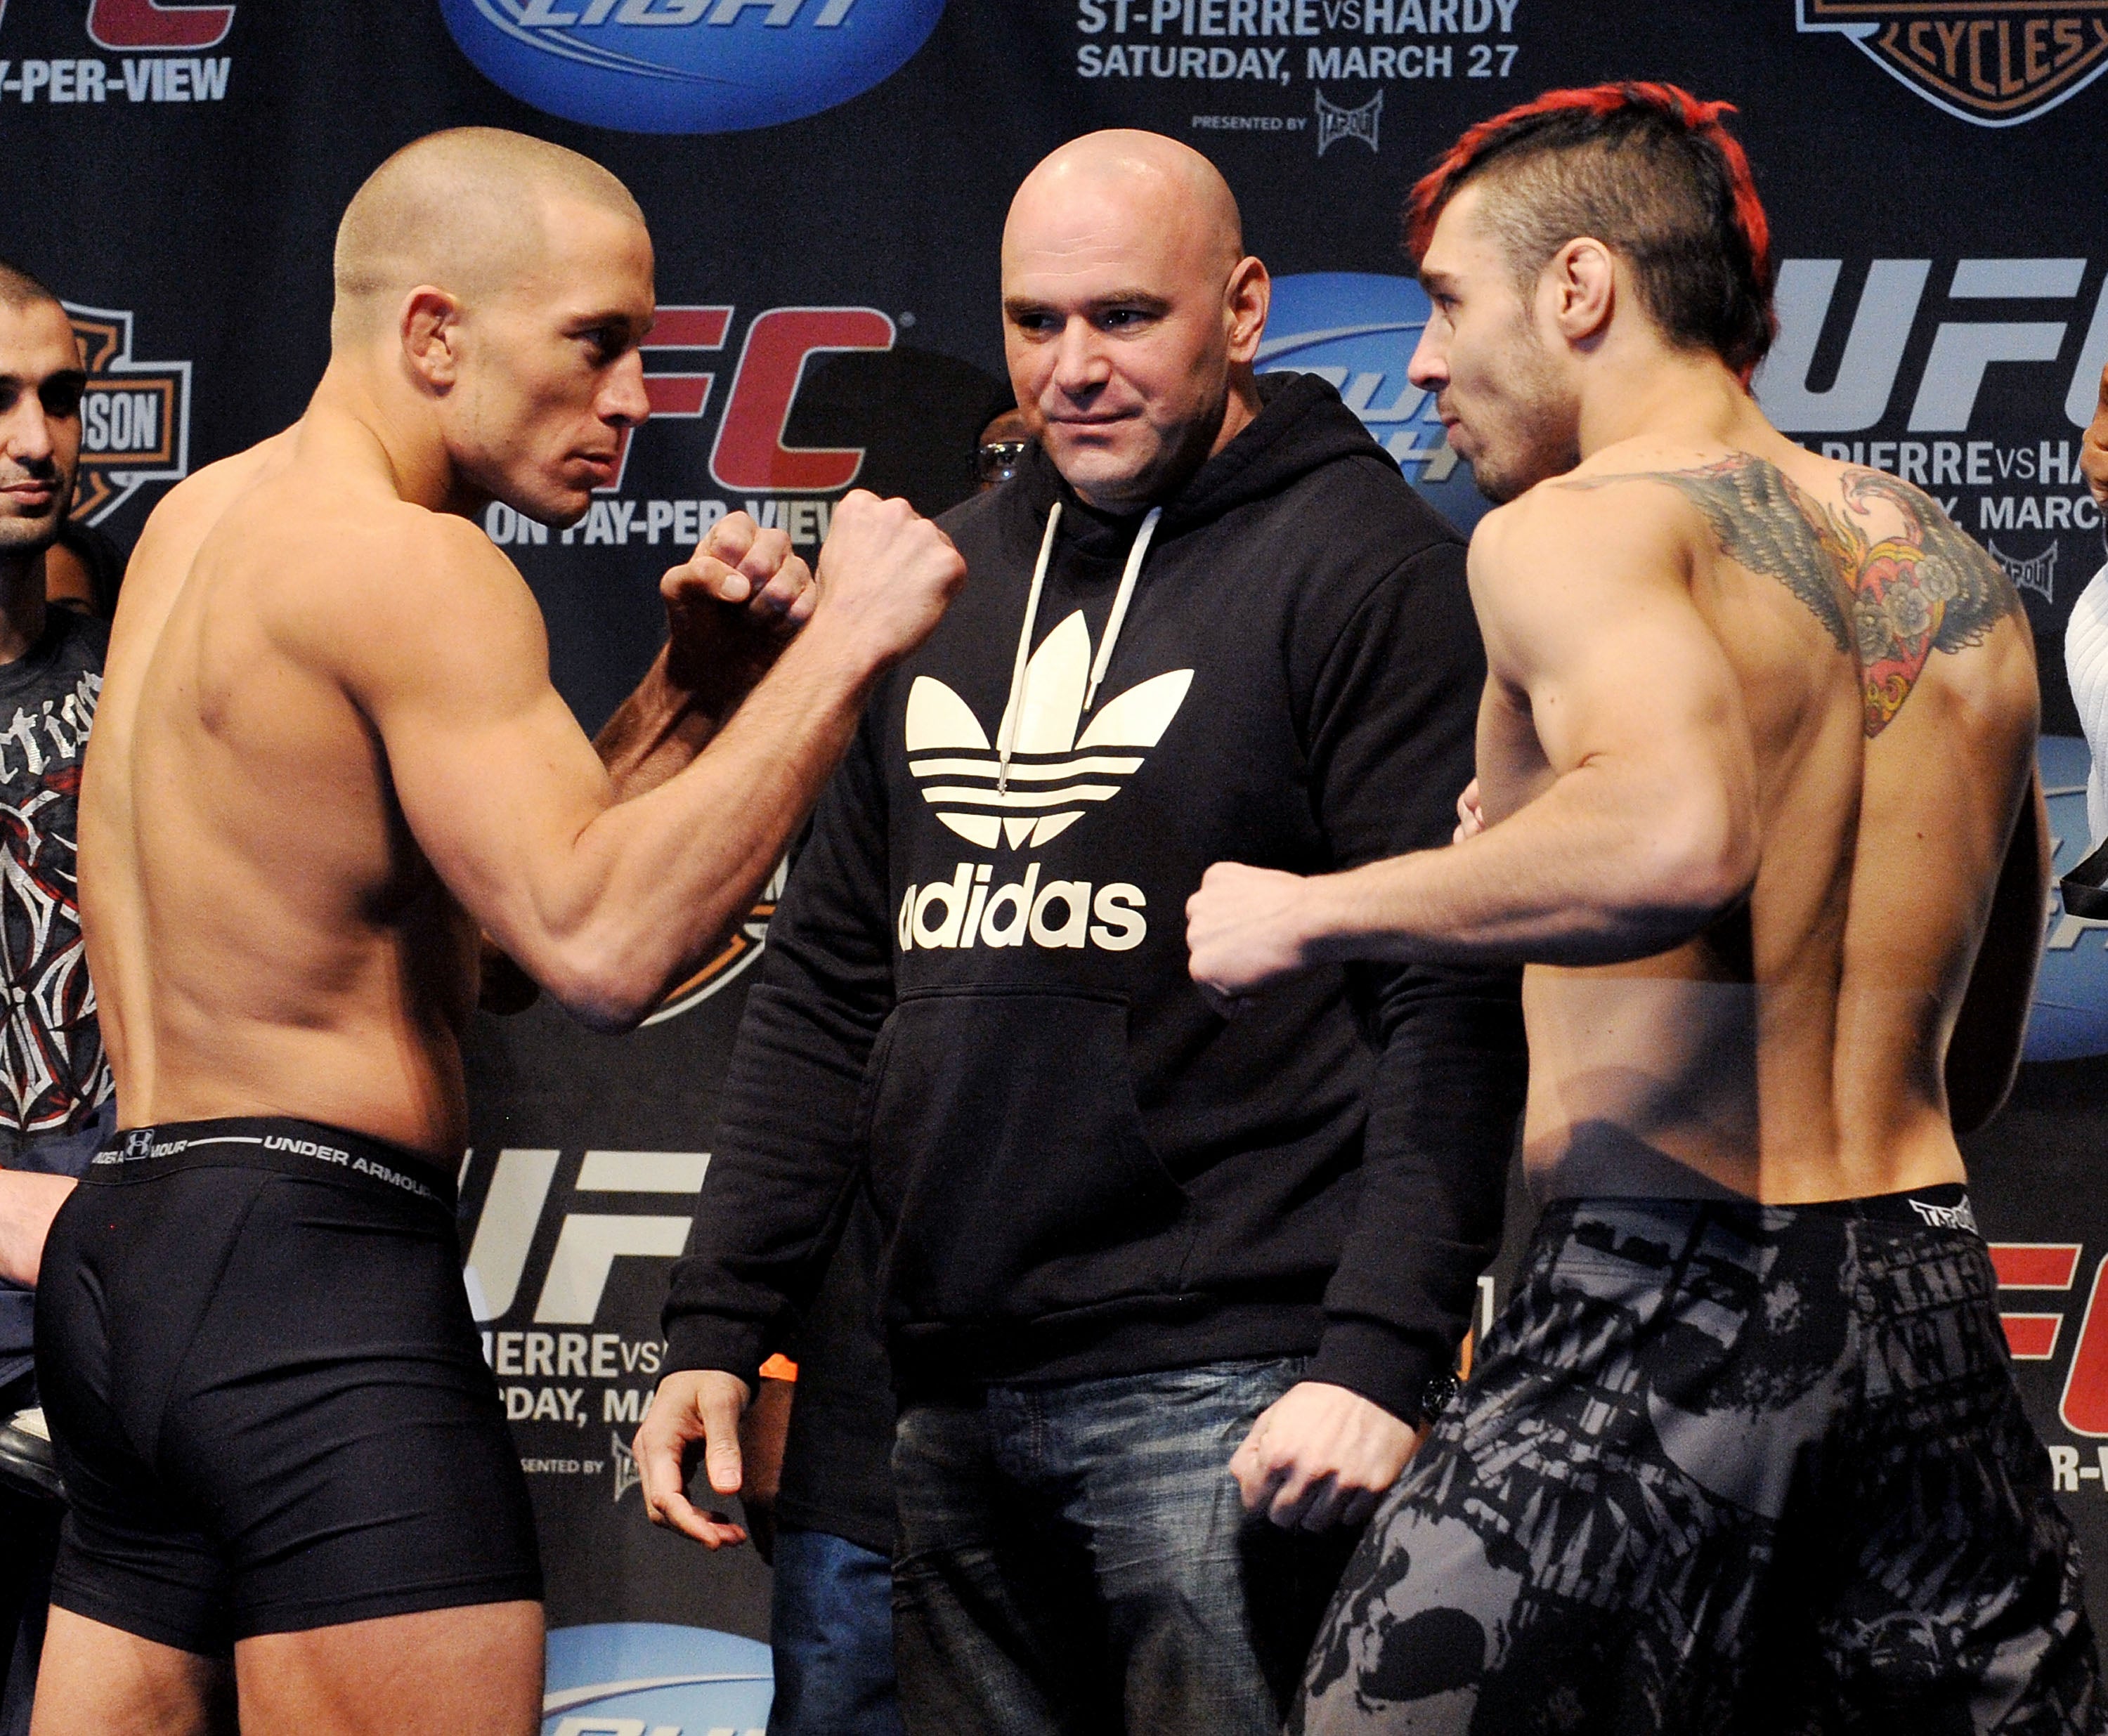 Hardy challenged Georges St-Pierre for the UFC welterweight title in 2010